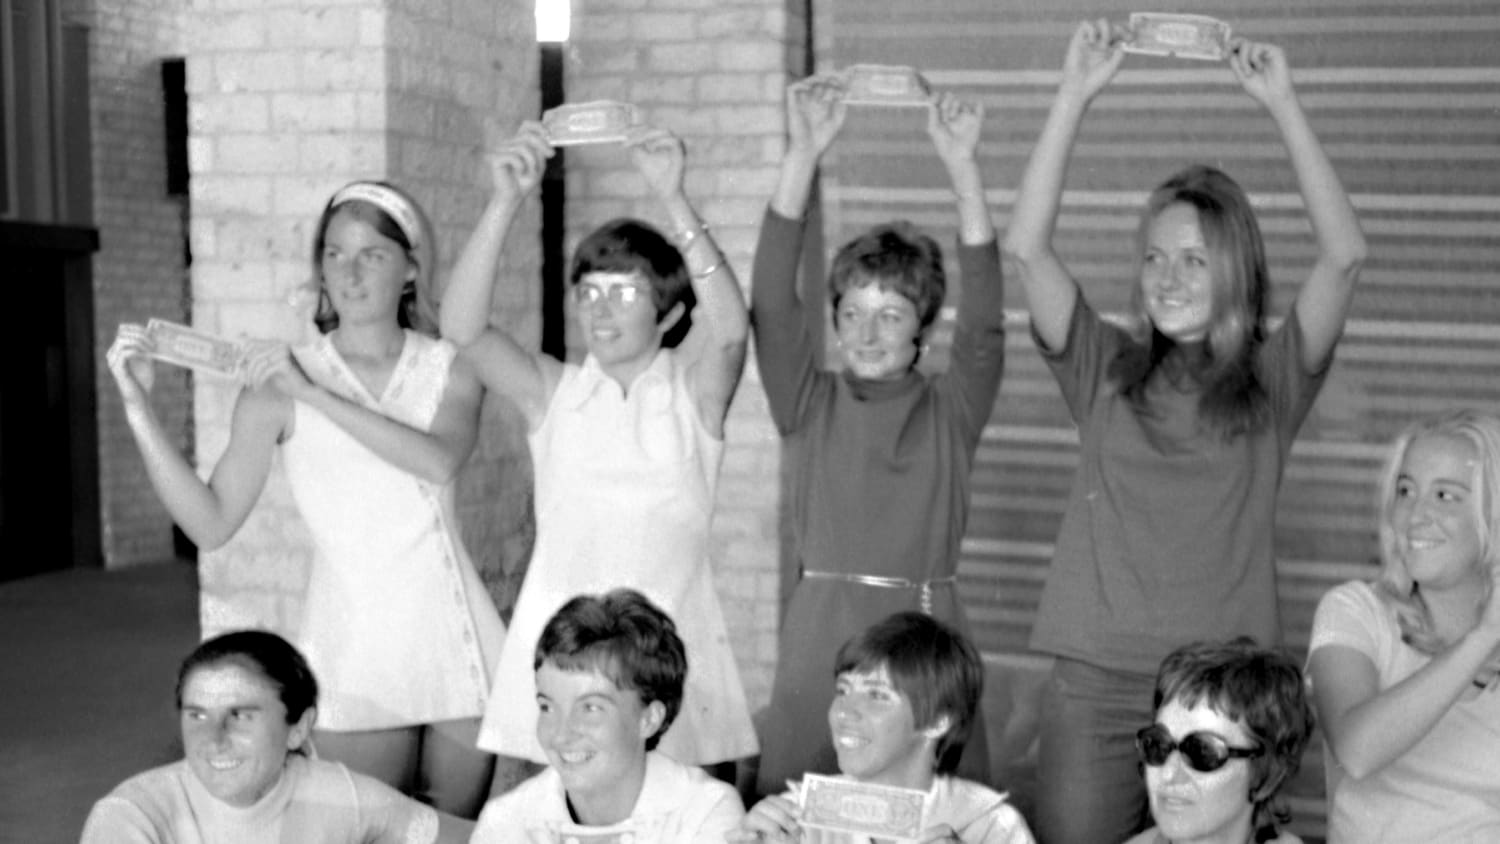 50 years ago, Billie Jean King and other women pros boycotted a tennis tournament and started their own to spark change